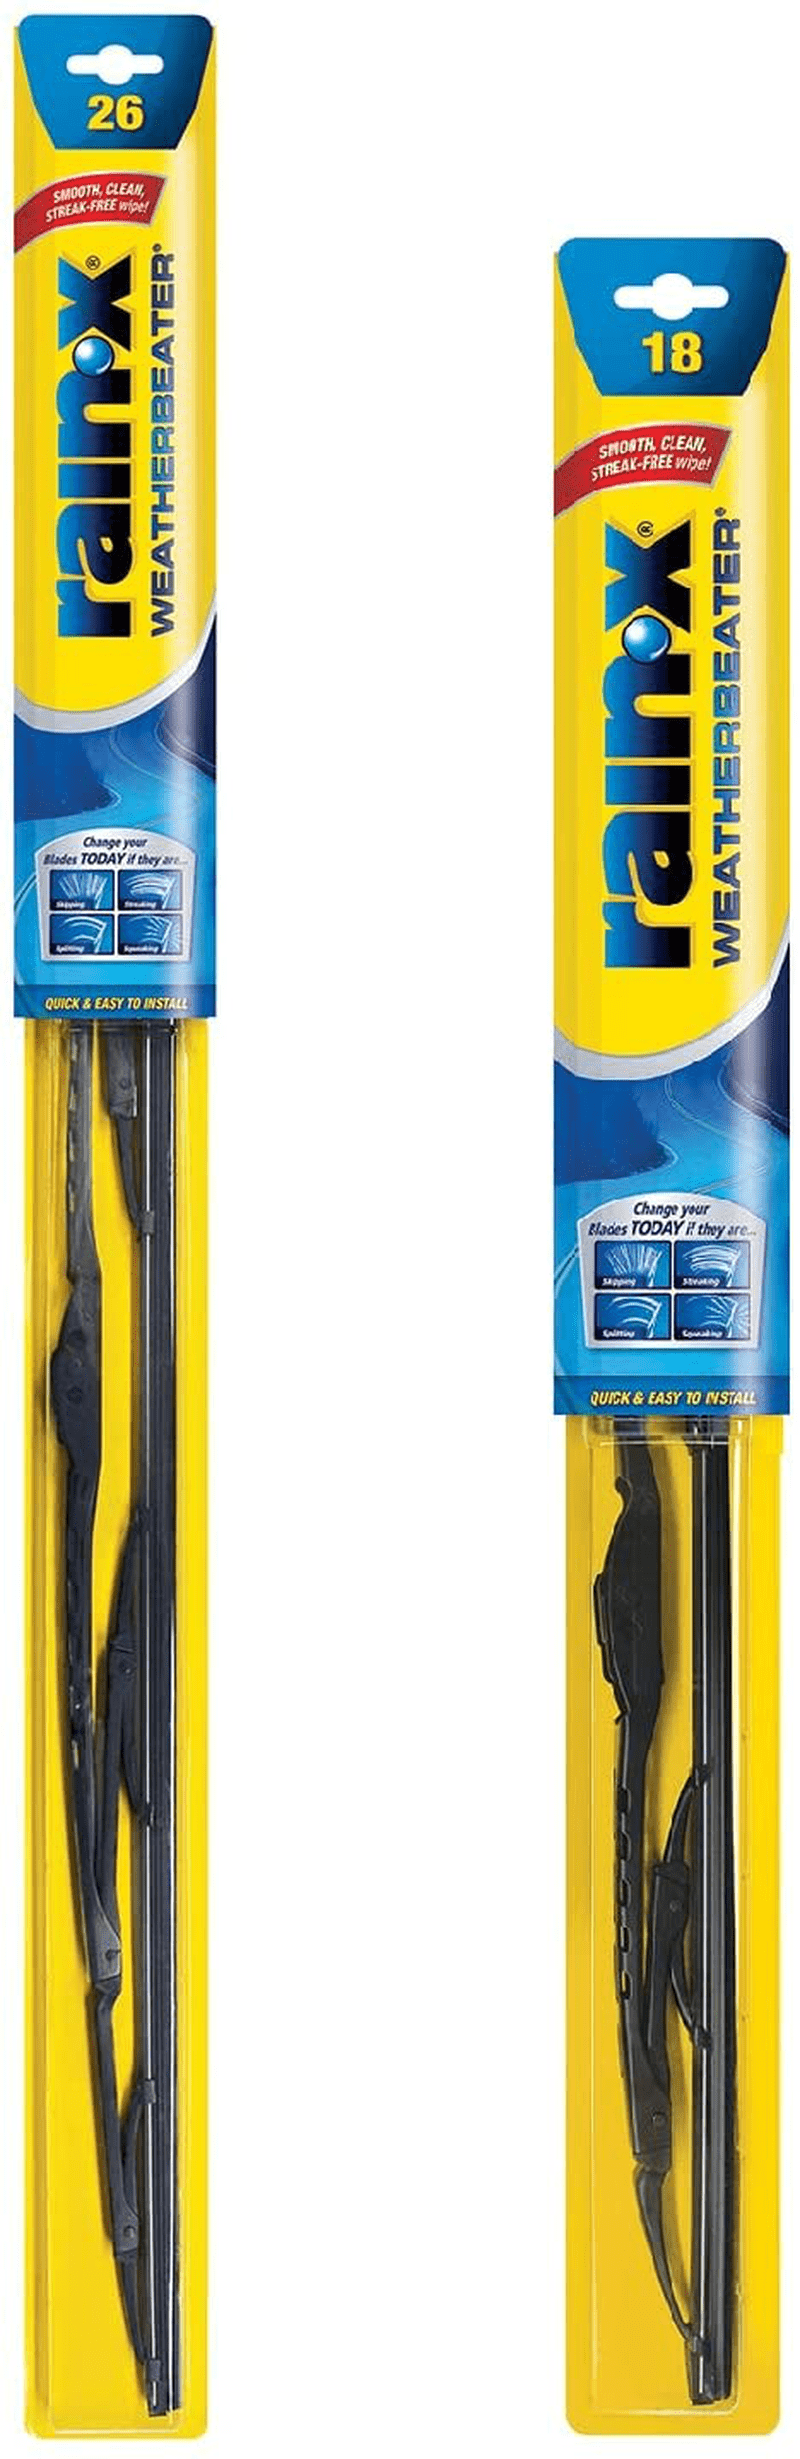 Rain-X RX30218 Weatherbeater Wiper Blade - 18-Inches - (Pack of 1) Vehicles & Parts > Vehicle Parts & Accessories > Motor Vehicle Parts Rain-X 2-pack 26 / 18 in combo 